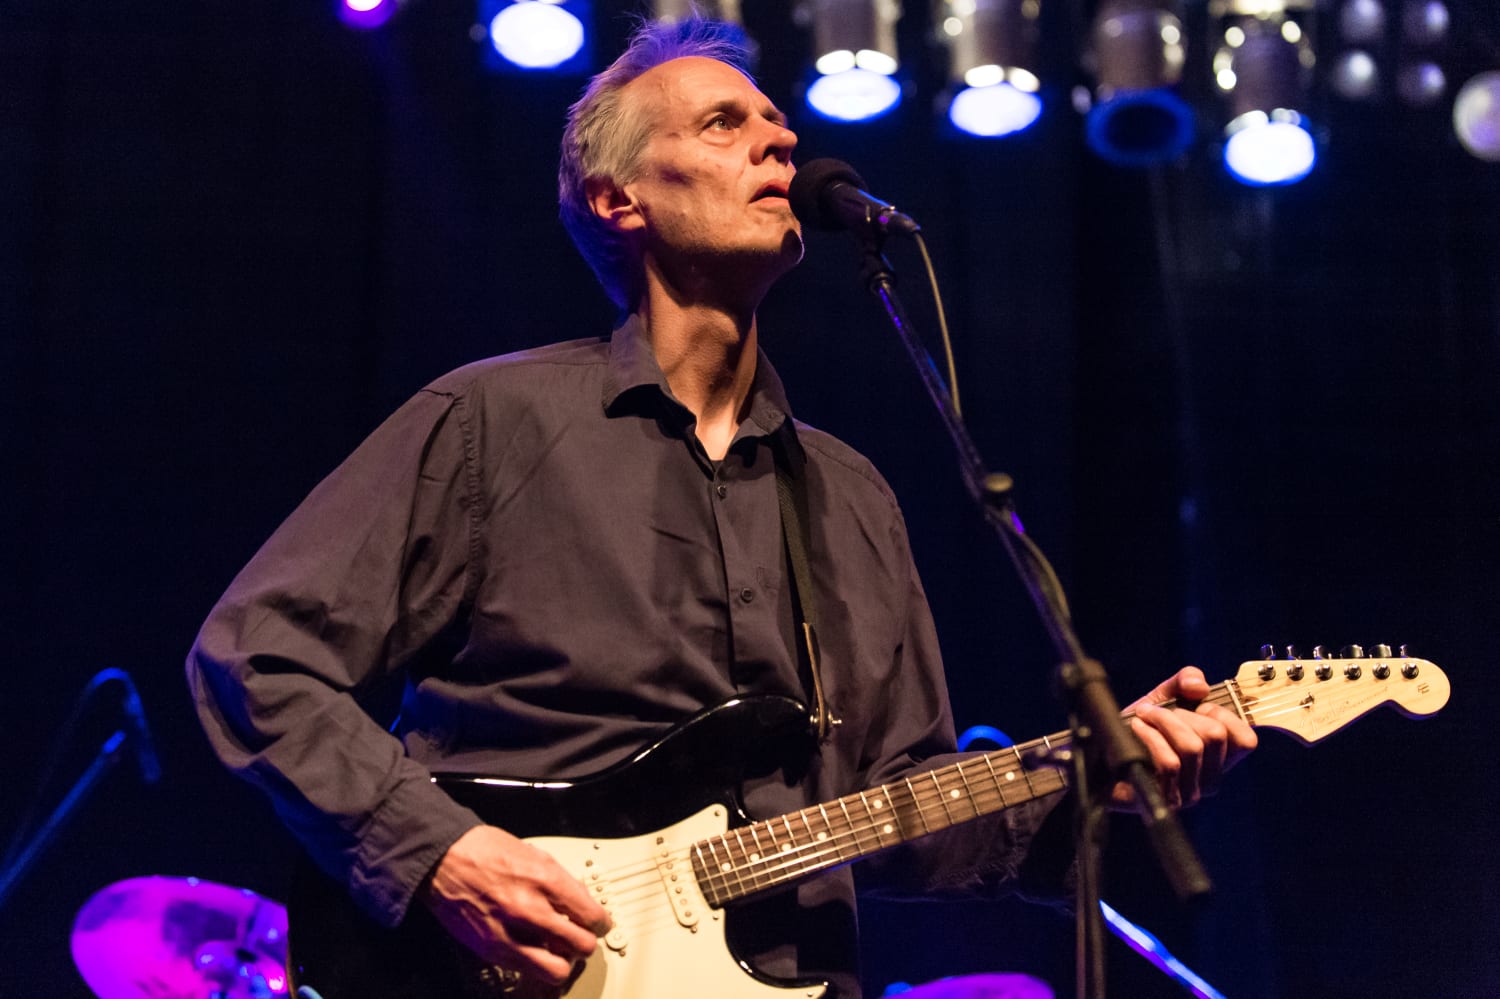 Punk icon Tom Verlaine, founder of the band Television, dies at 73